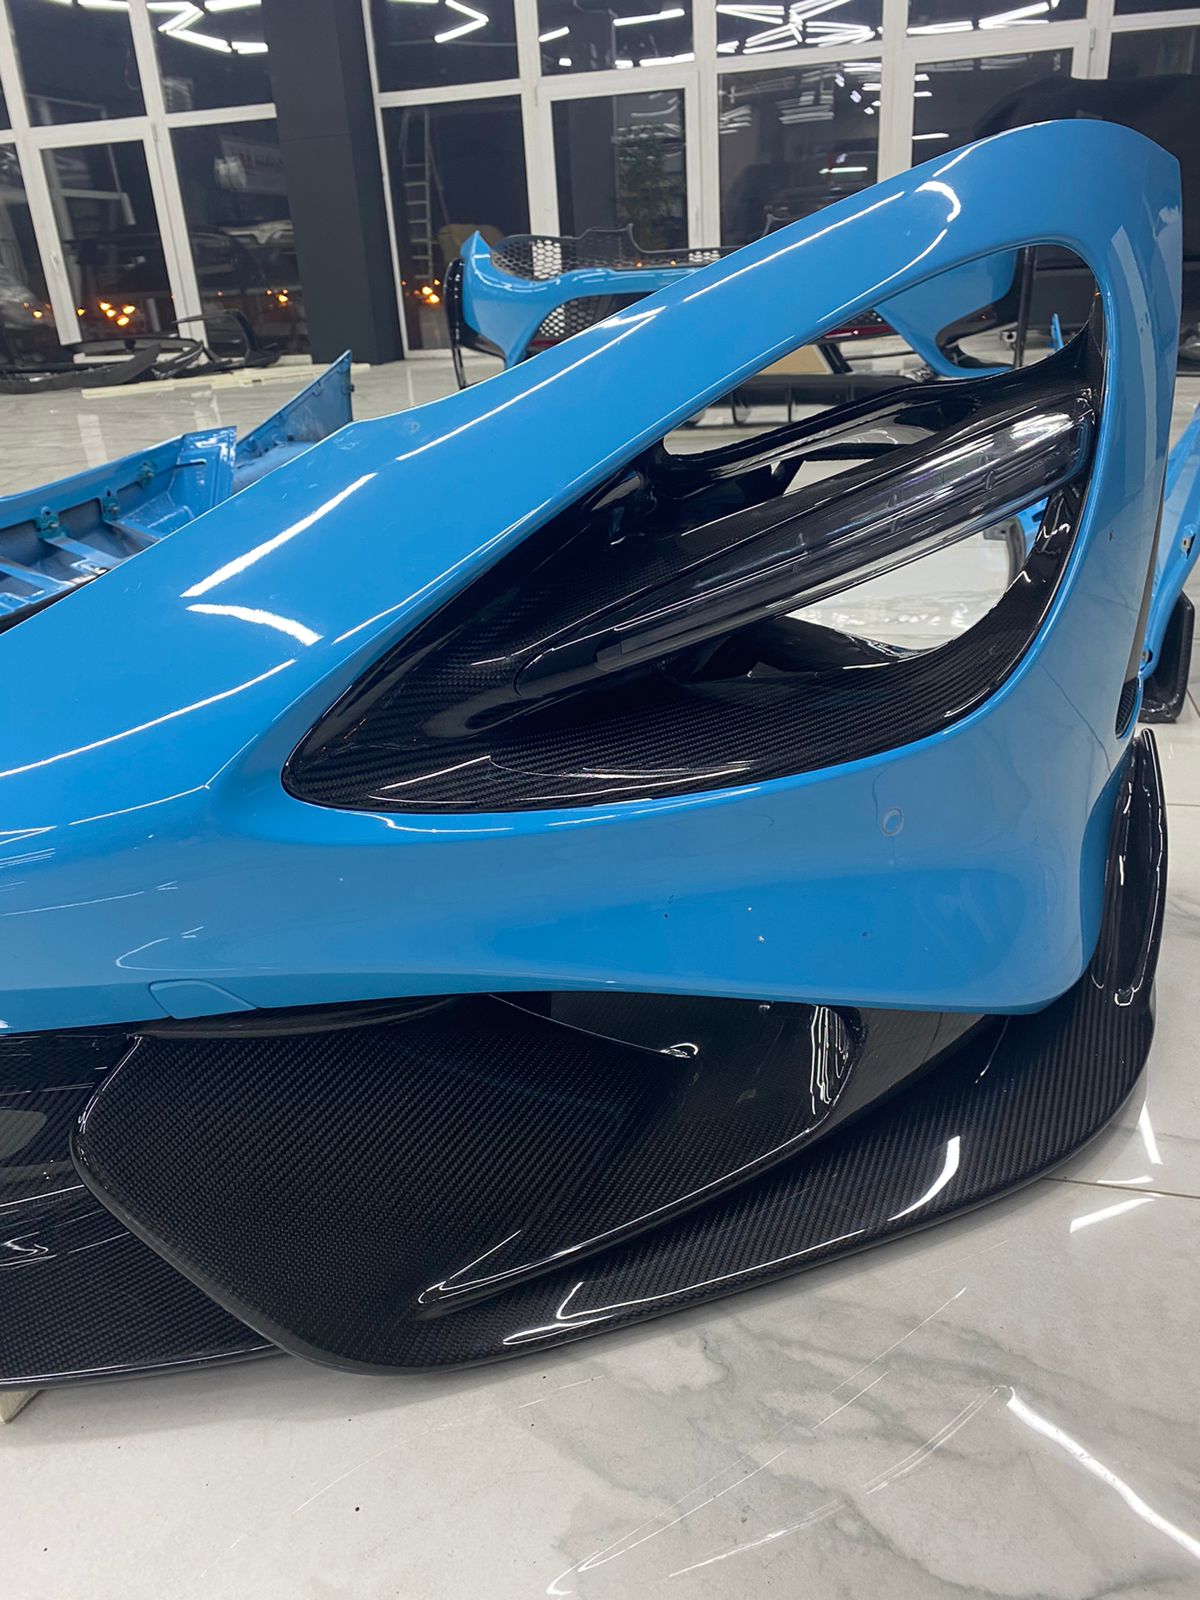 Check our price and buy Renegade Design body kit for McLaren 765LT